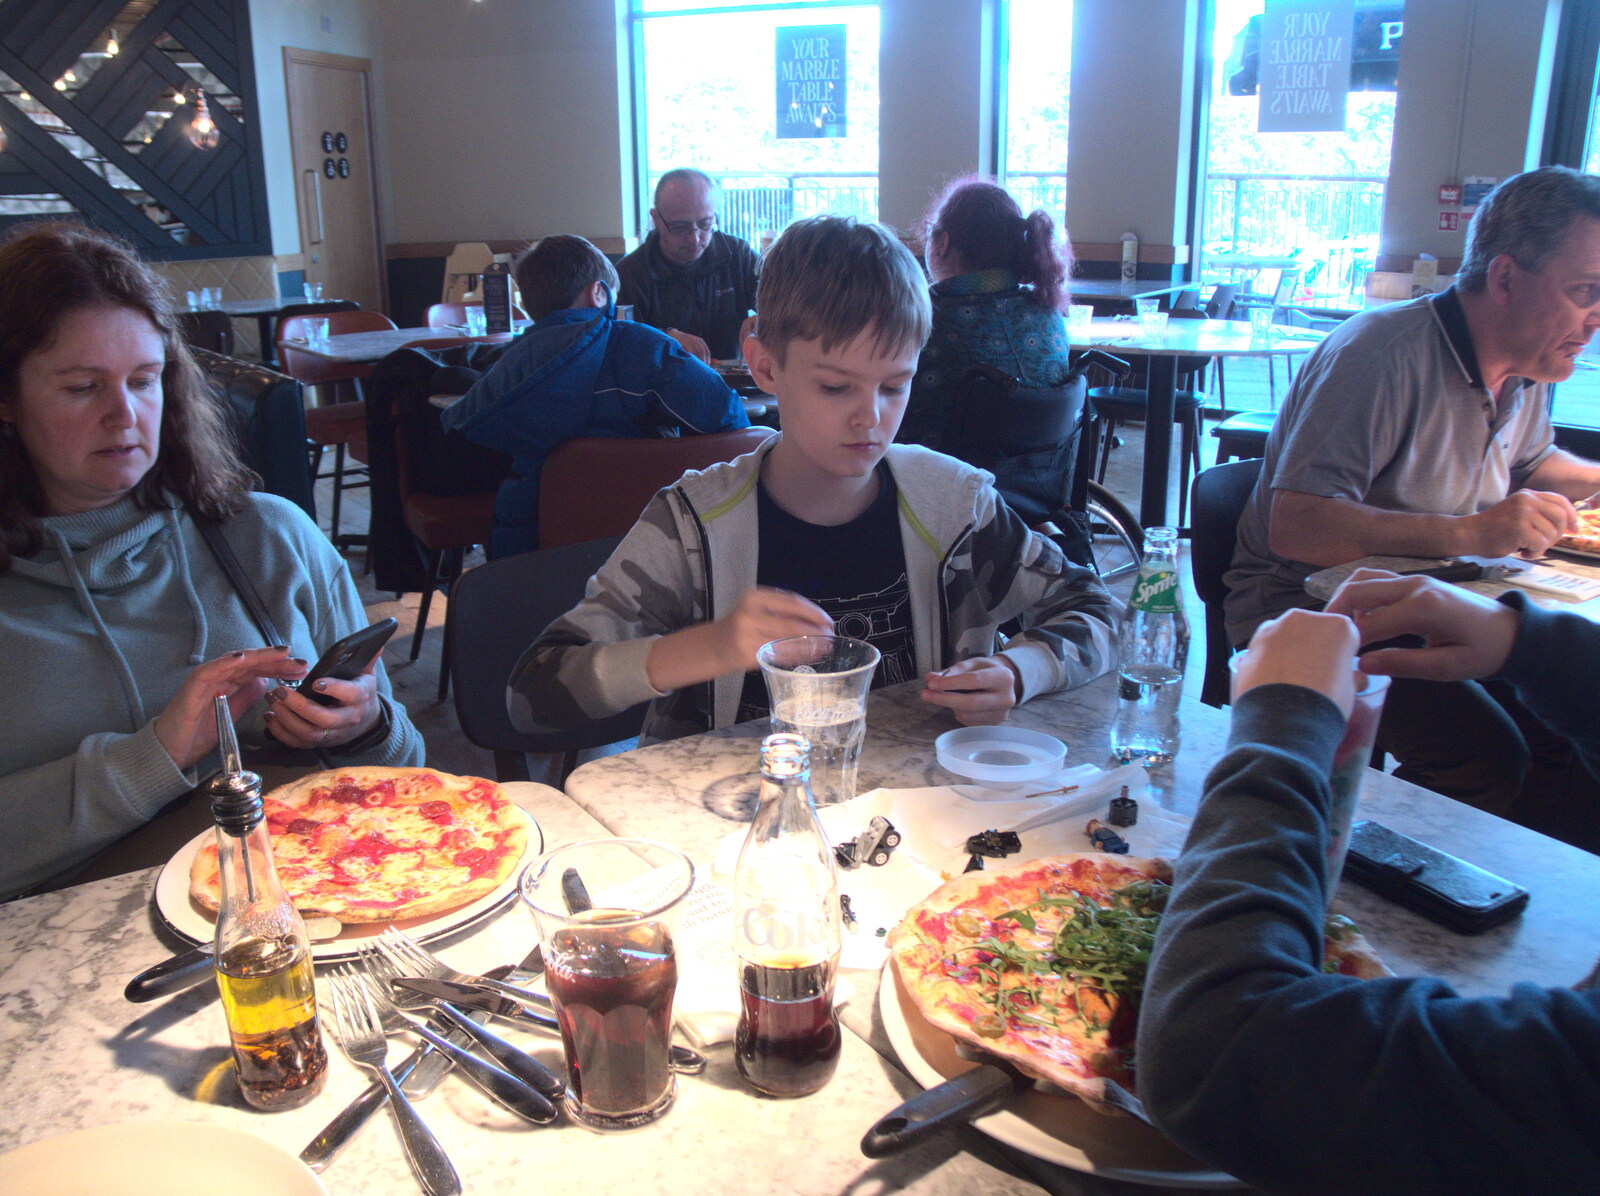 We stop for pizza at Fleet Services South from Easter in South Zeal and Moretonhampstead, Devon - 9th April